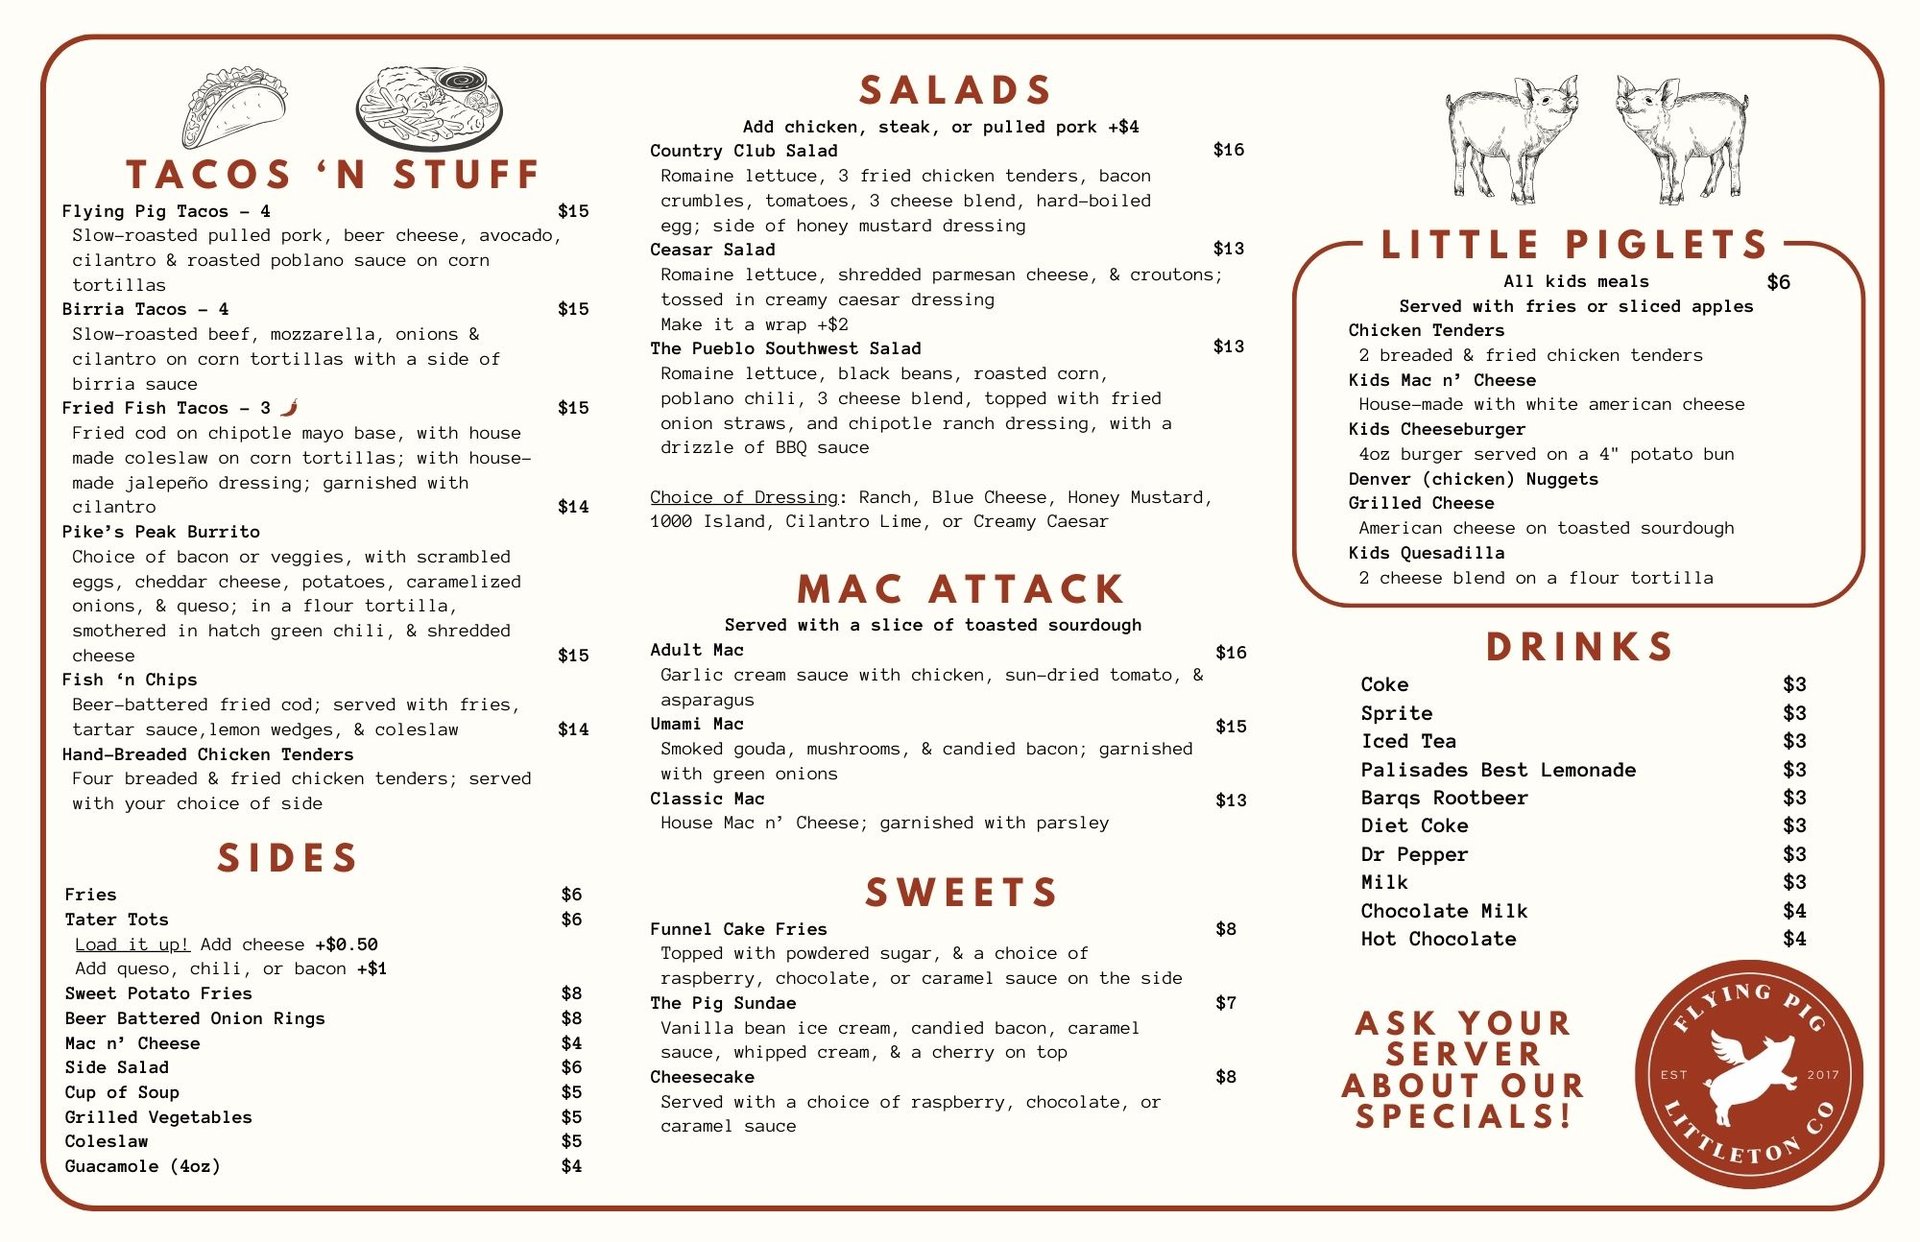 Page 2 of the new FP Menu